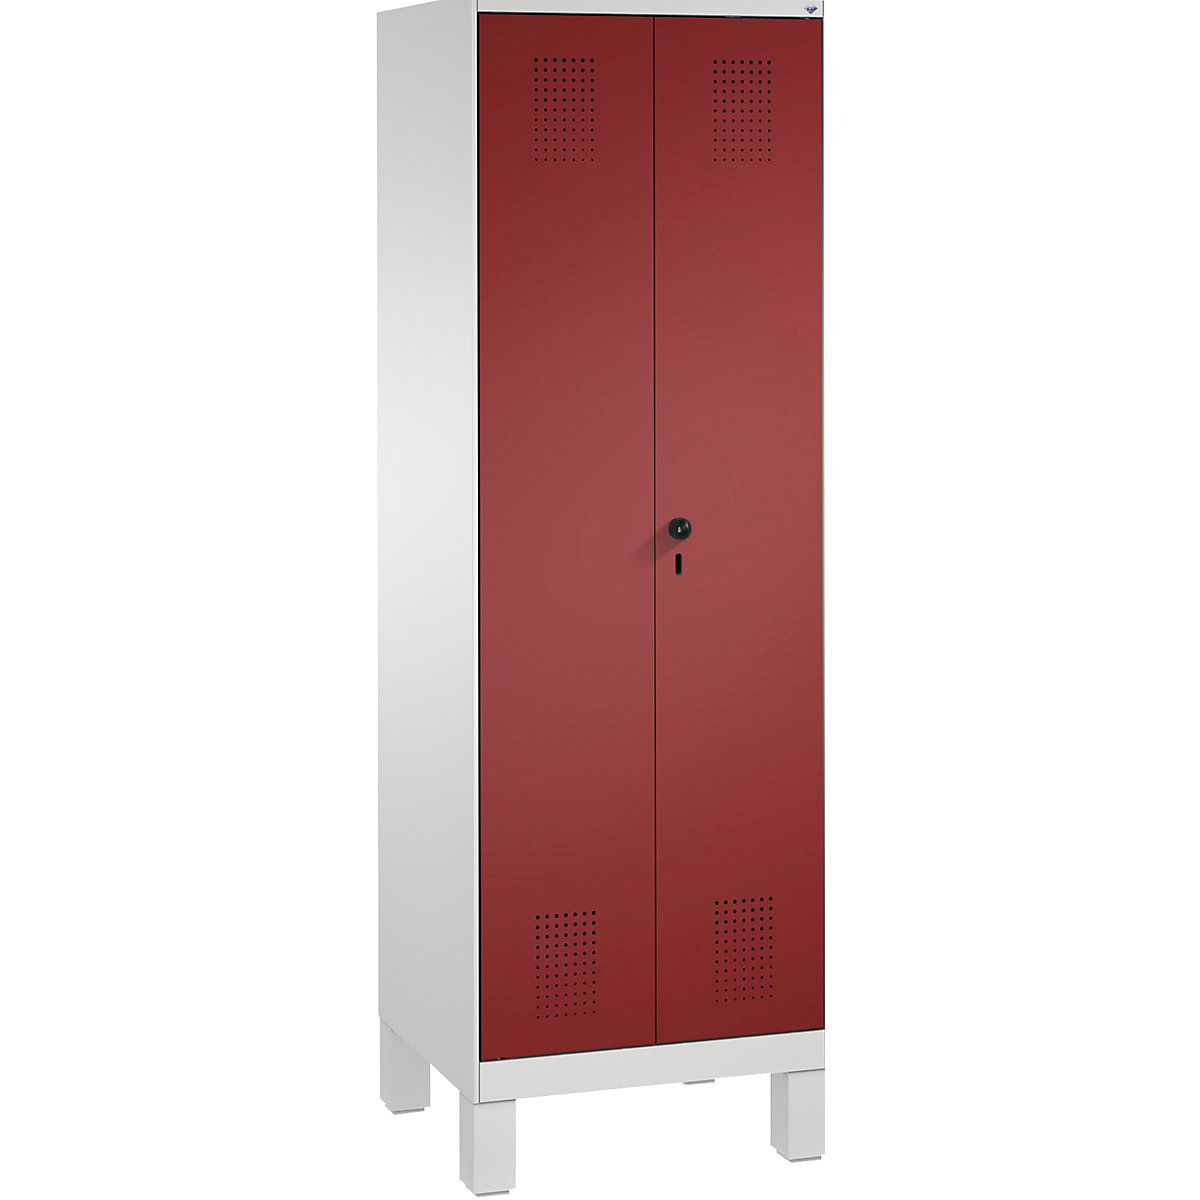 EVOLO laundry cupboard / cloakroom locker – C+P, 4 shelves, clothes rail, compartments 2 x 300 mm, with feet, light grey / ruby red-17